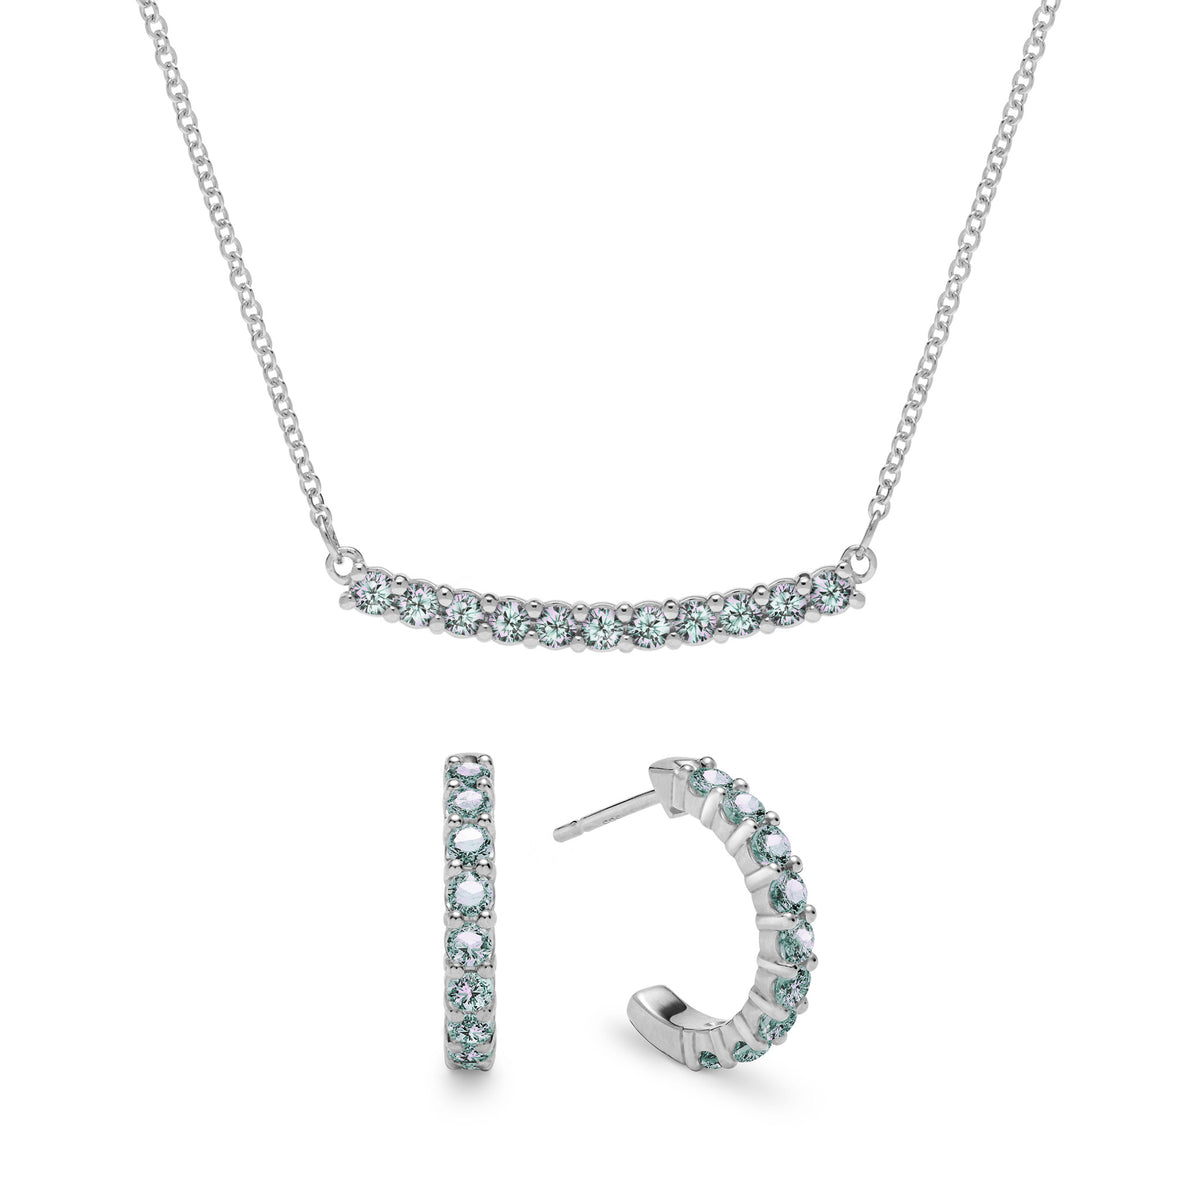 Tiffany & Co. Tiffany T Necklace In 18k White Gold | Lyst